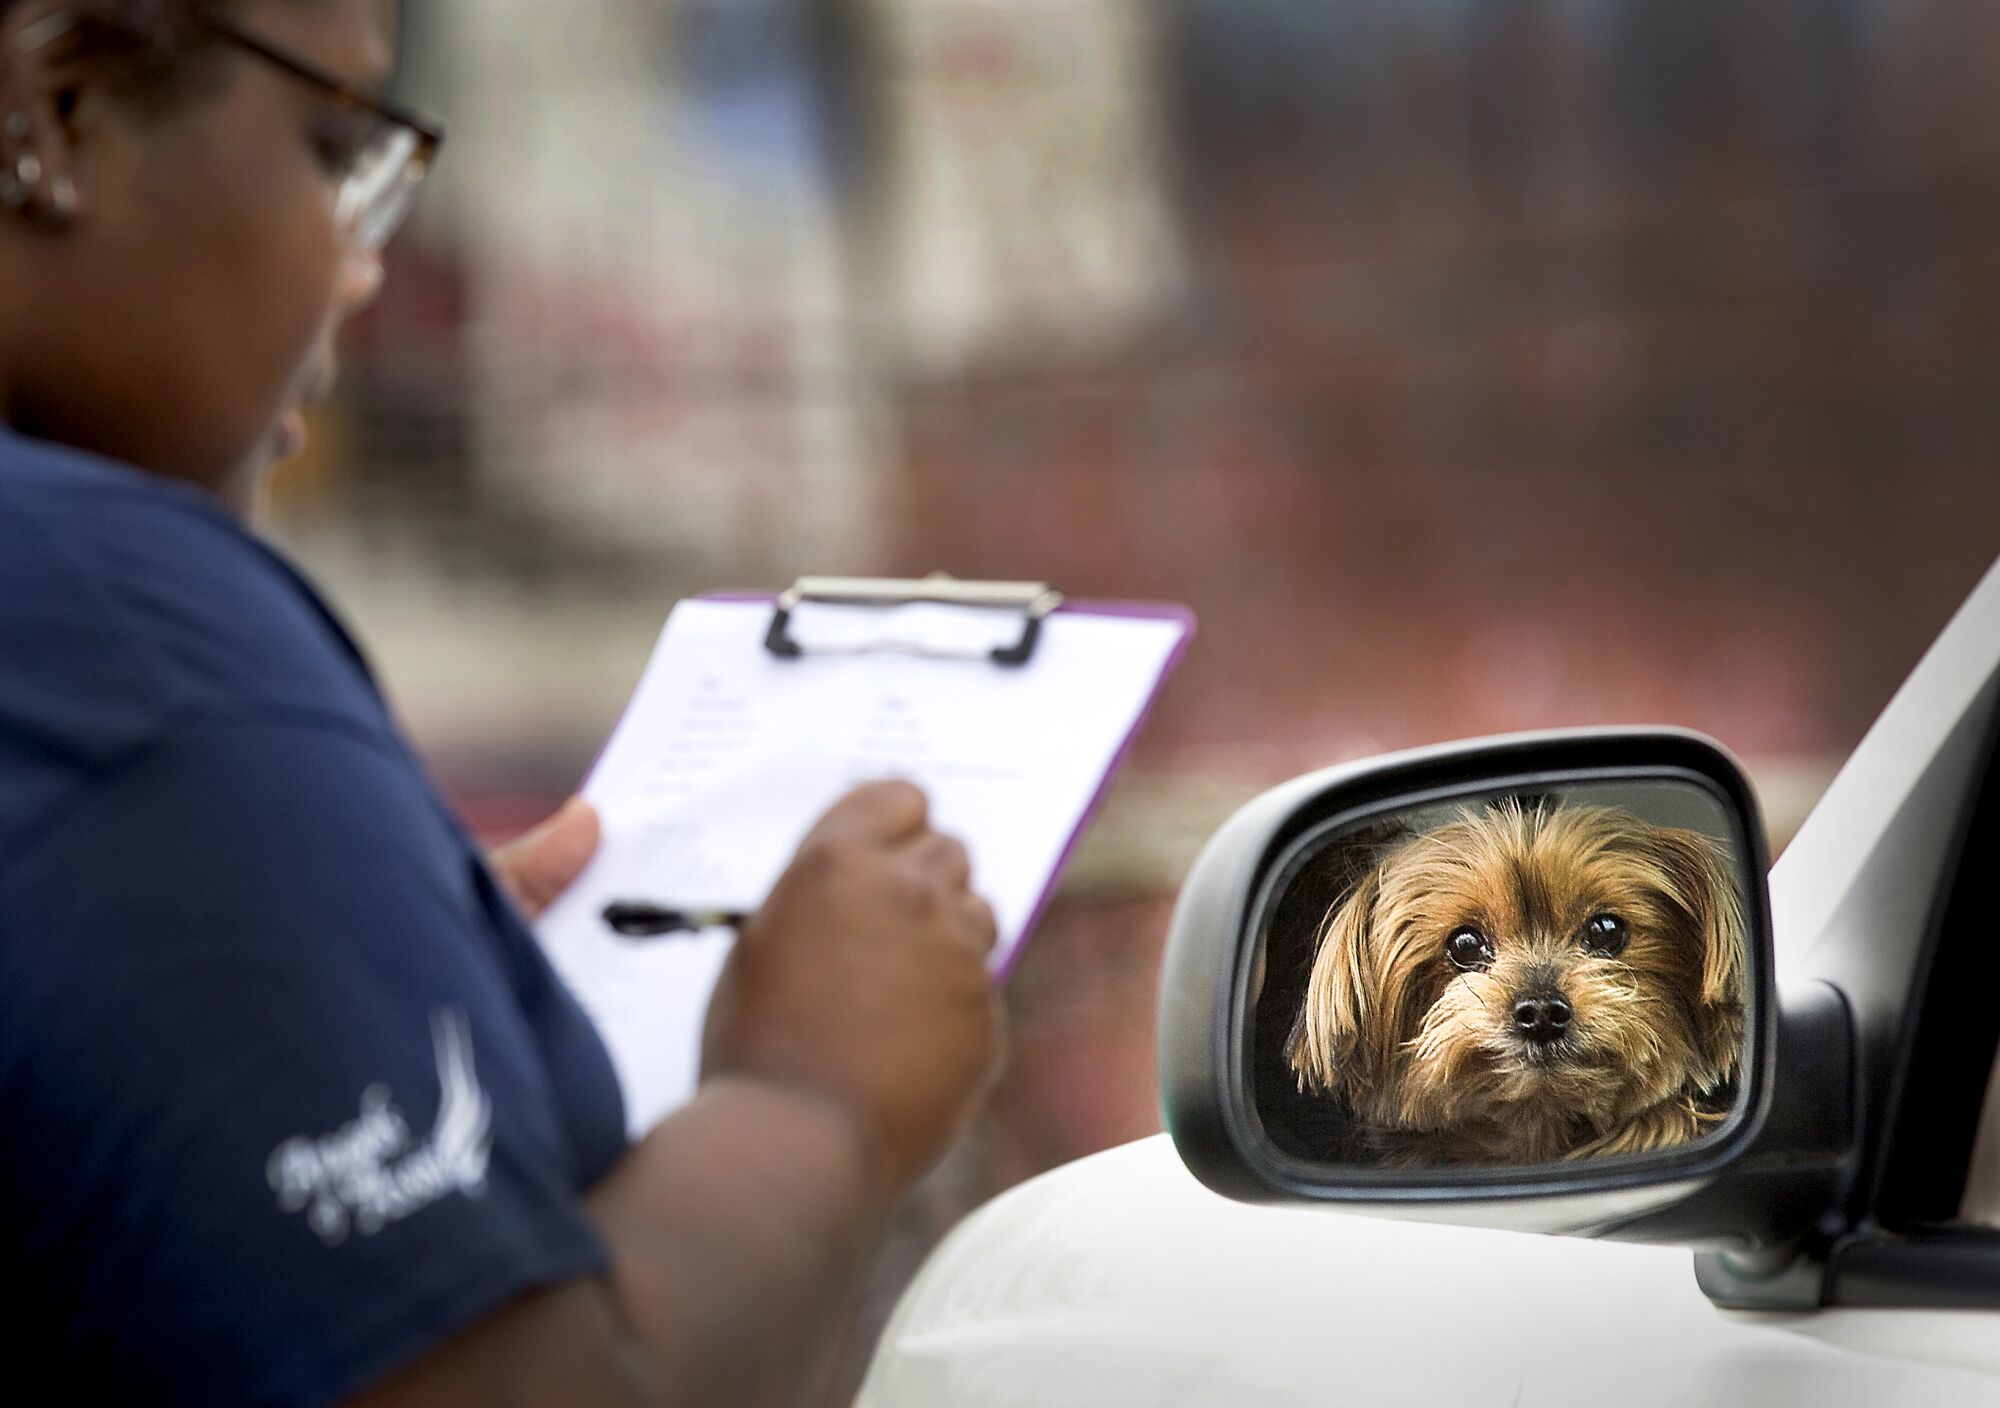 U.S.: Lex Taylor, a veterinarian assistant, checks in a Yorkshire terrier named Gabby on March 26 in Roanoke, Va. Angels of Assisi has started offering its low-cost vet clinic on a curb outside the clinic to reduce people's exposure to the coronavirus.